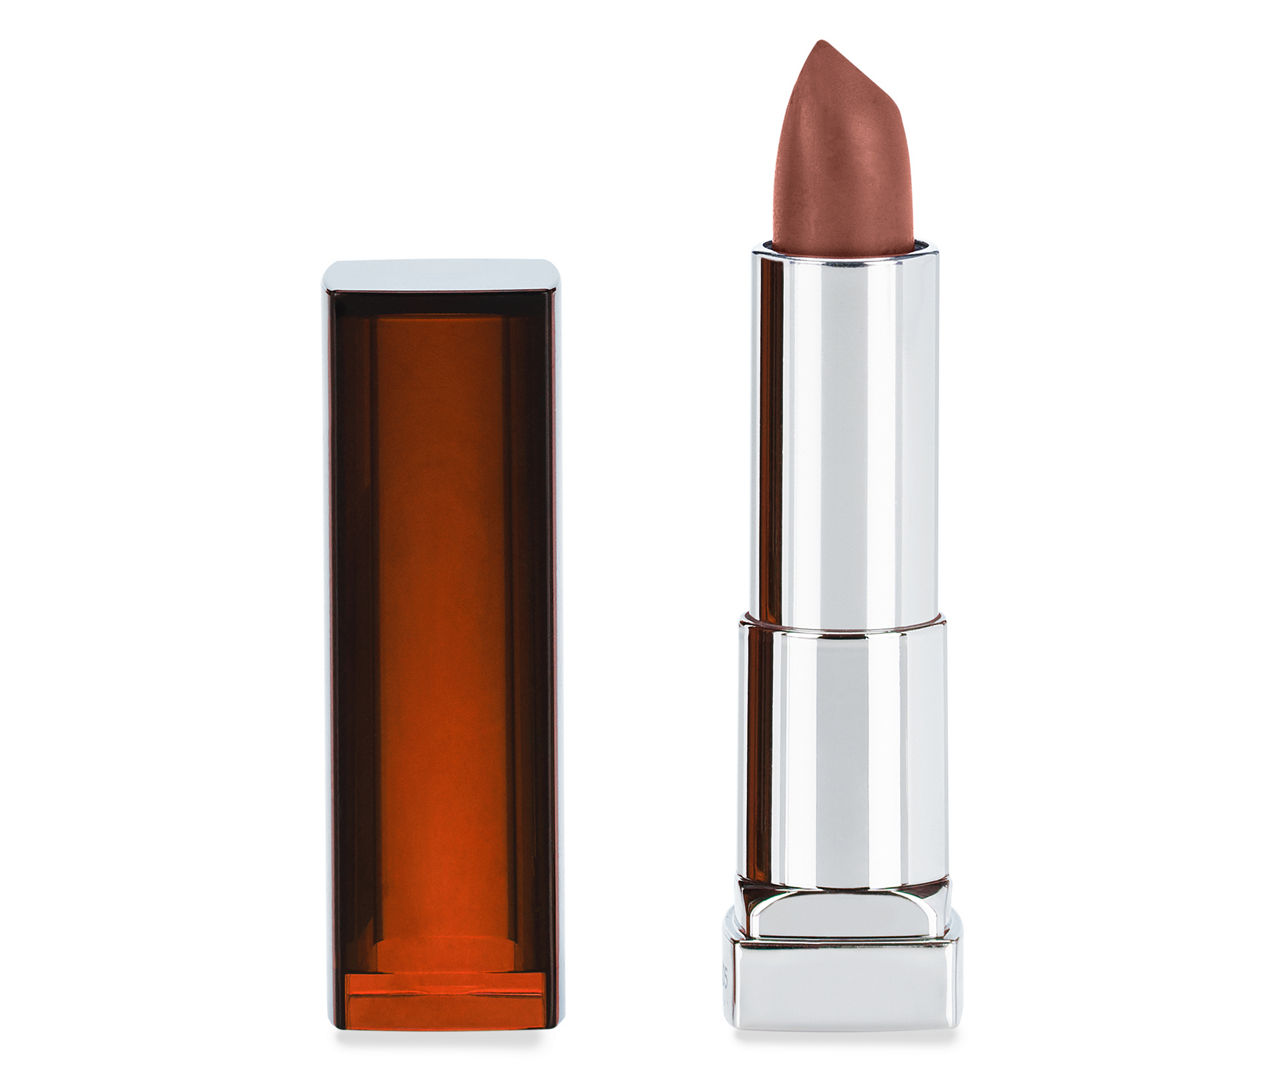 Maybelline Color Sensational The Creams, Cream Finish Lipstick Makeup, Nearly There, 0.15 oz.